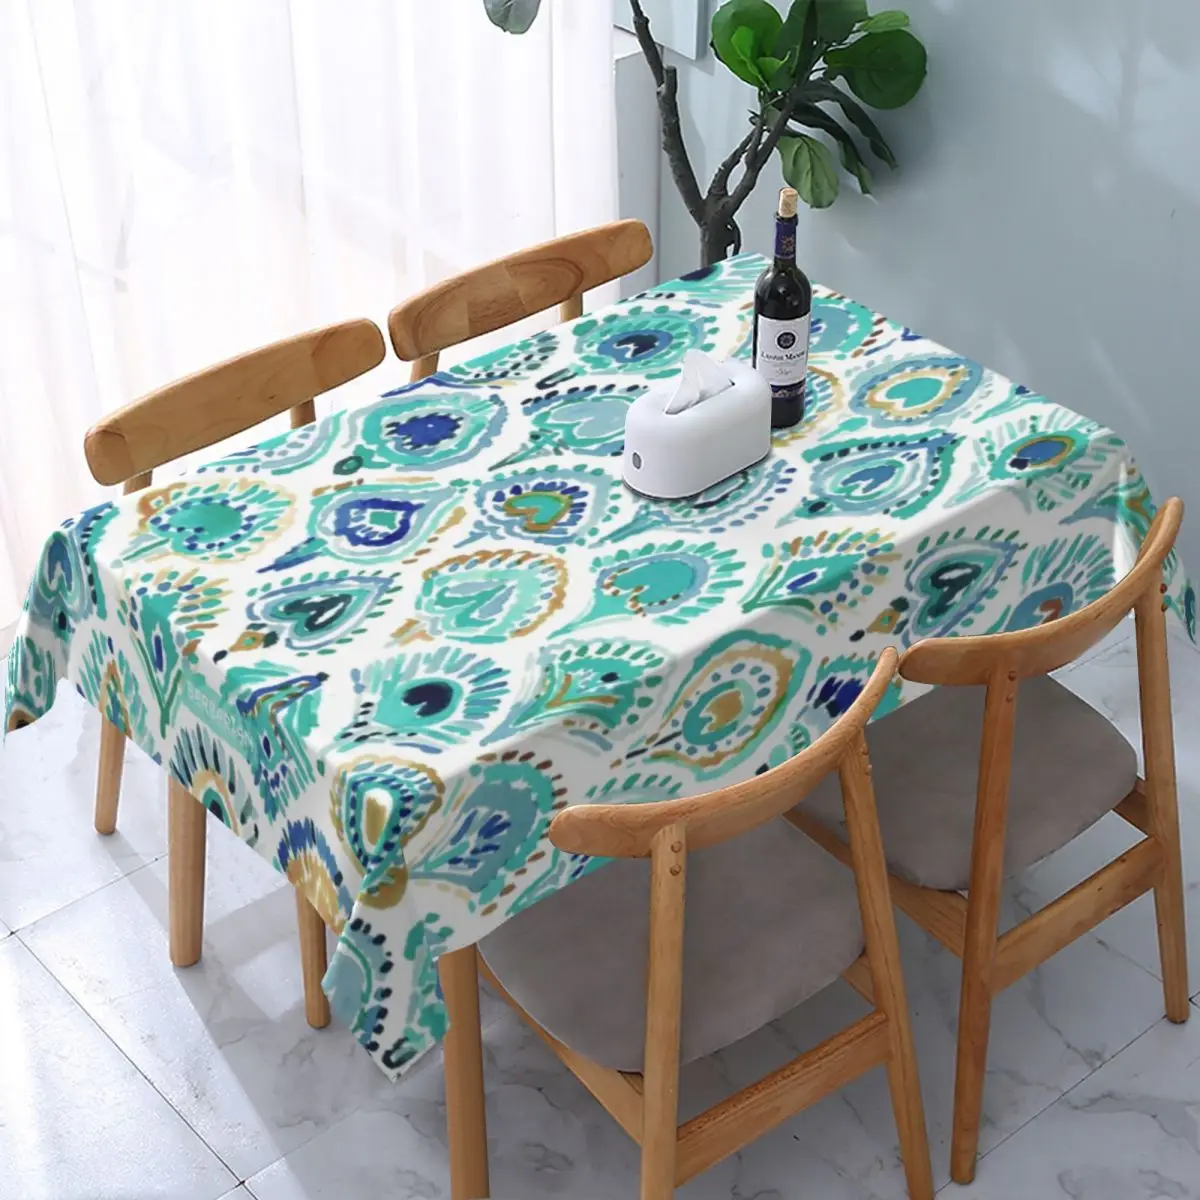 

Rectangular Peacock Mermaid Nautical Scales And Feathers Table Cloth Waterproof Tablecloth Table Cover Backed with Elastic Edge